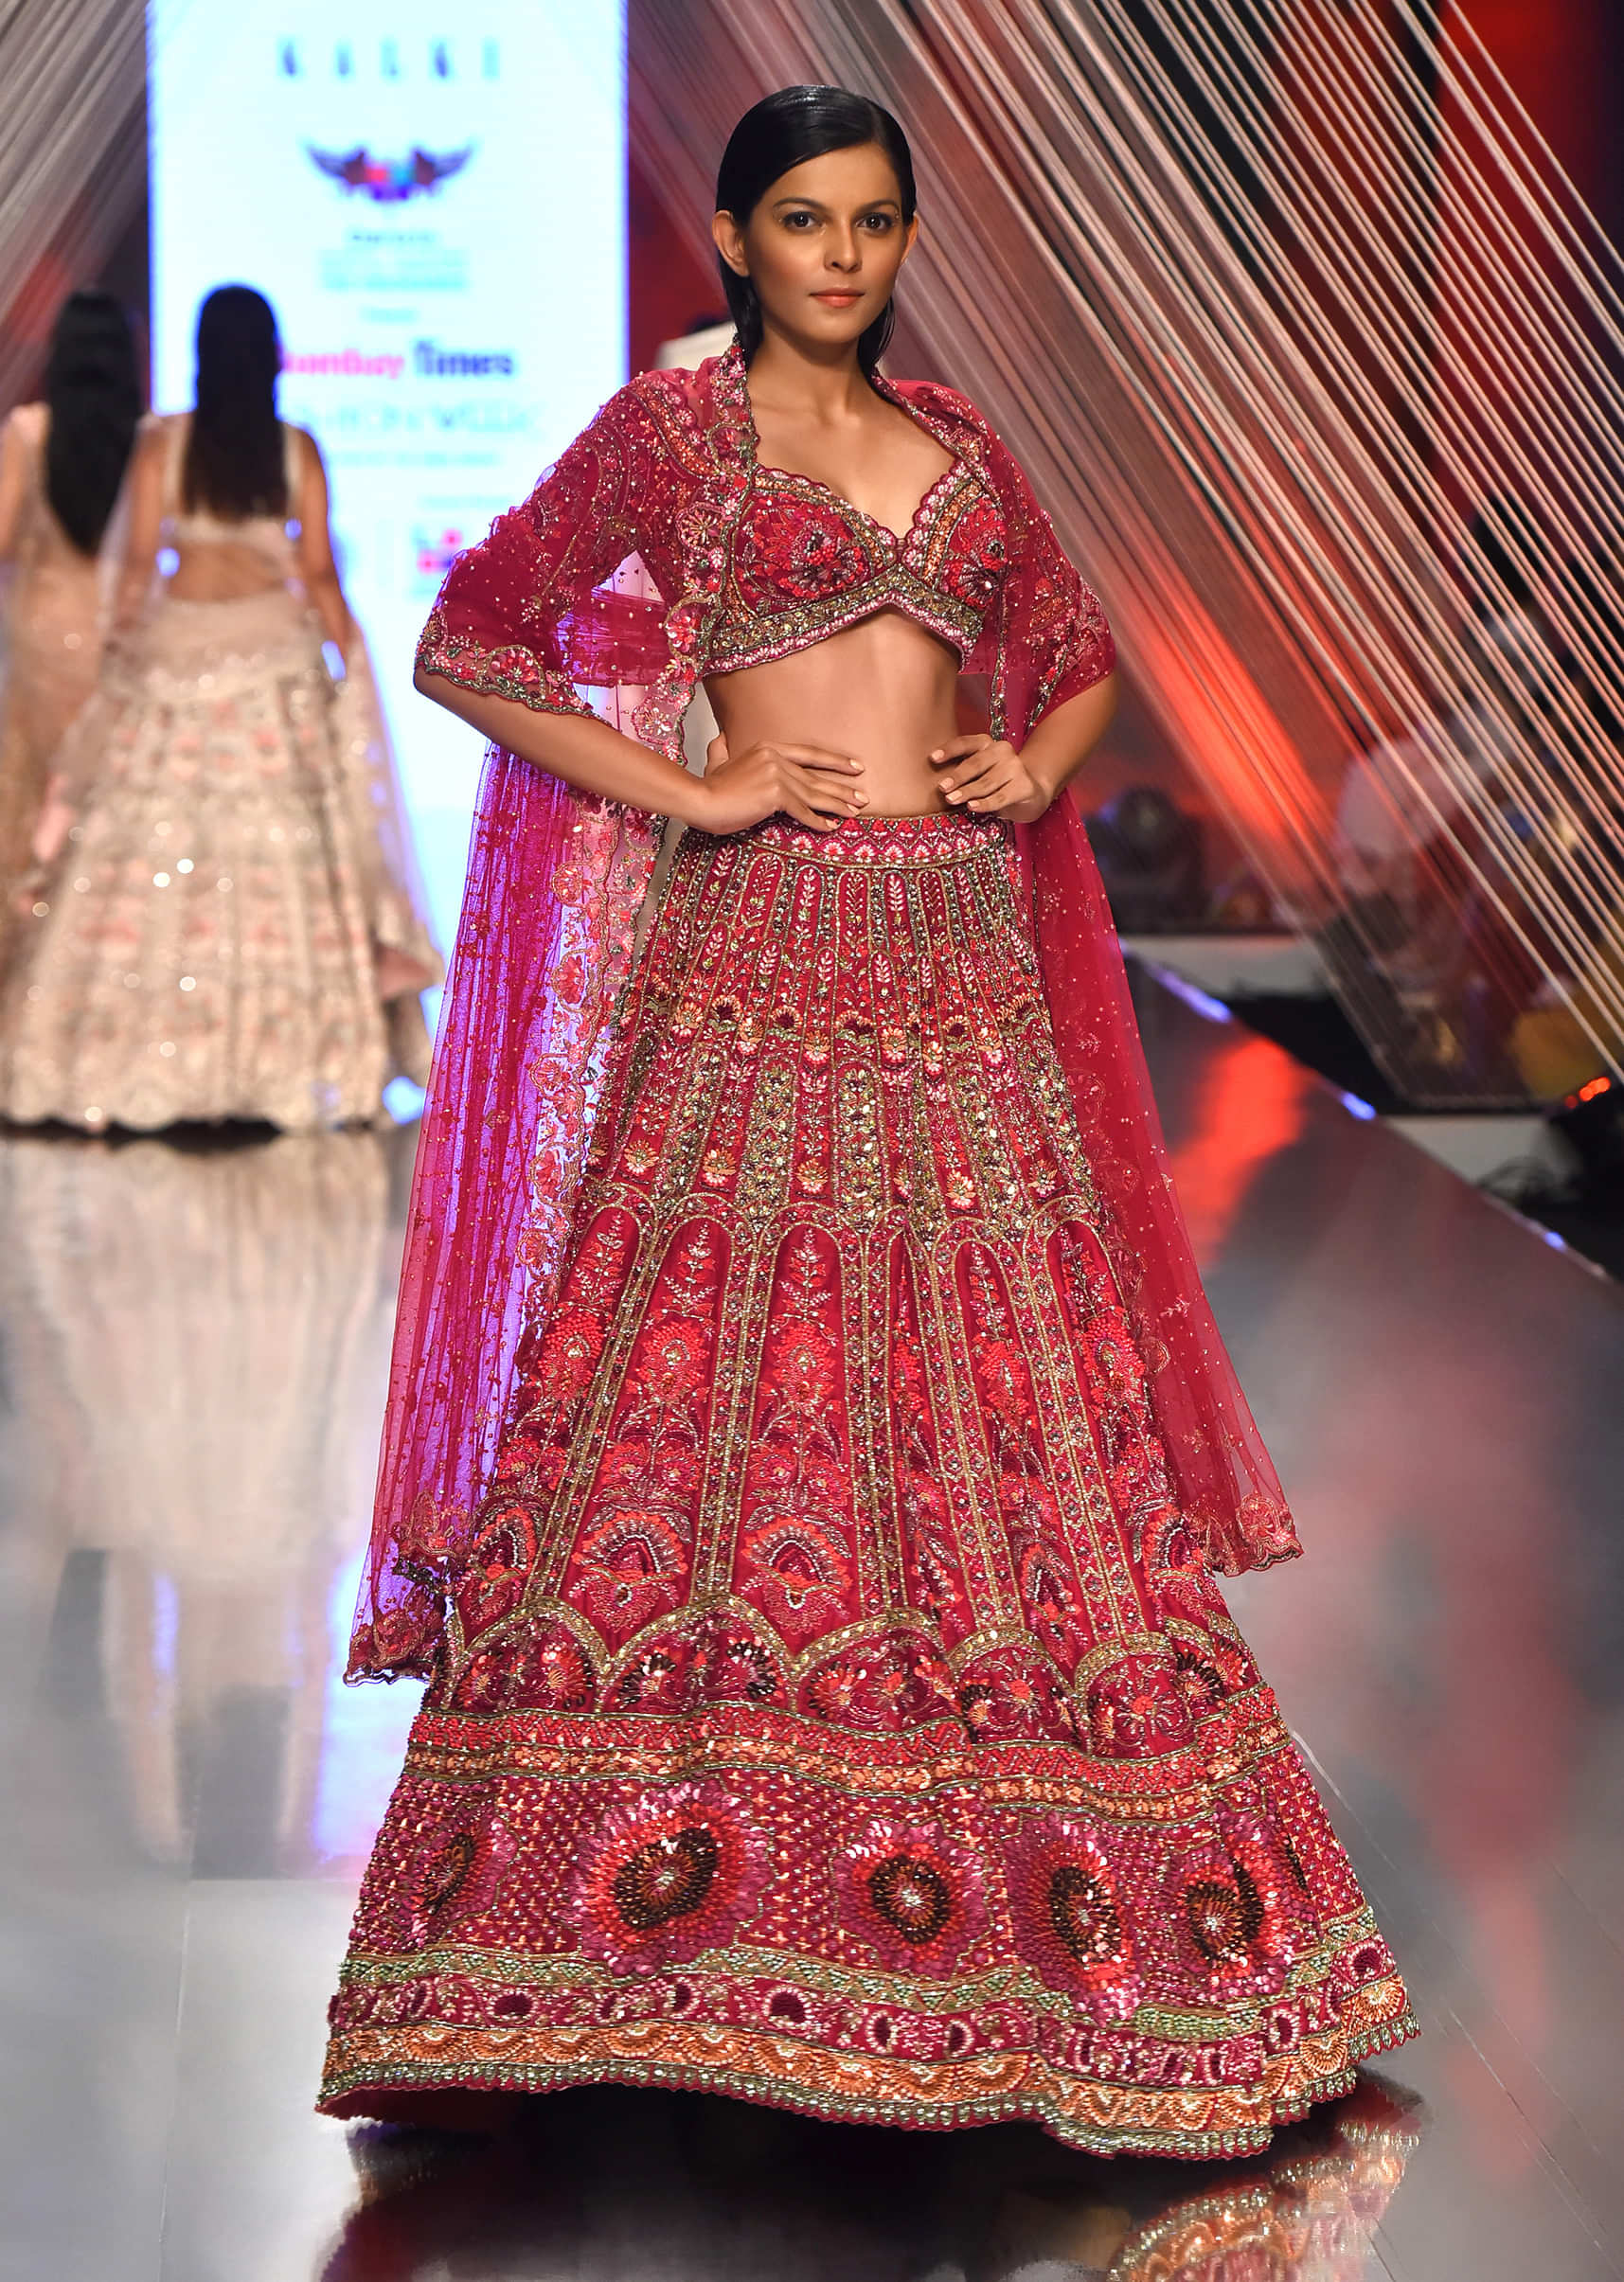 Dark Red Lehenga With A Crop Top In Royal Heritage Embroidery, Crop Top Comes In Scalloped Neckline